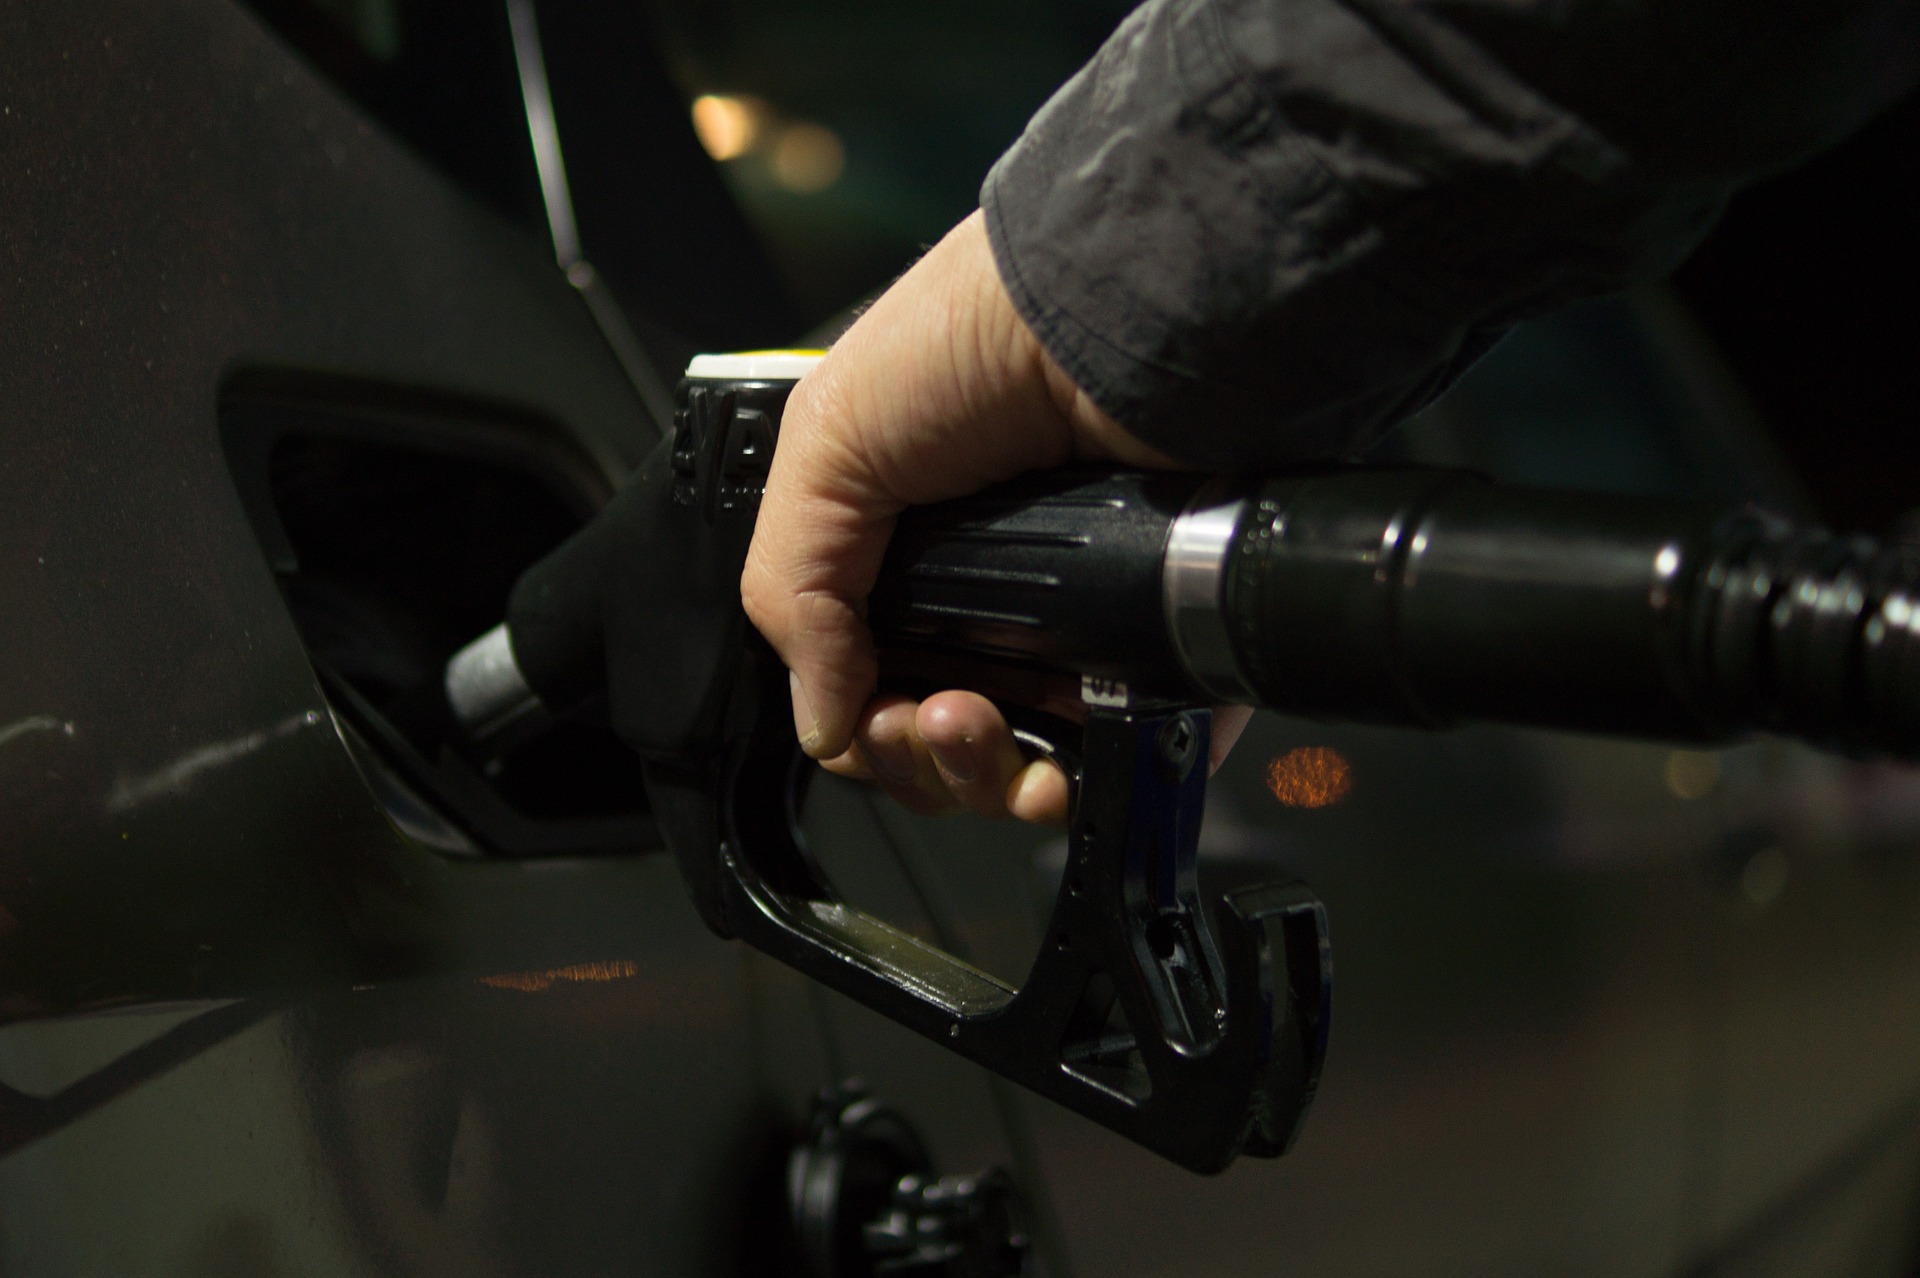 Fuel expenses may climb further as oil tops $70